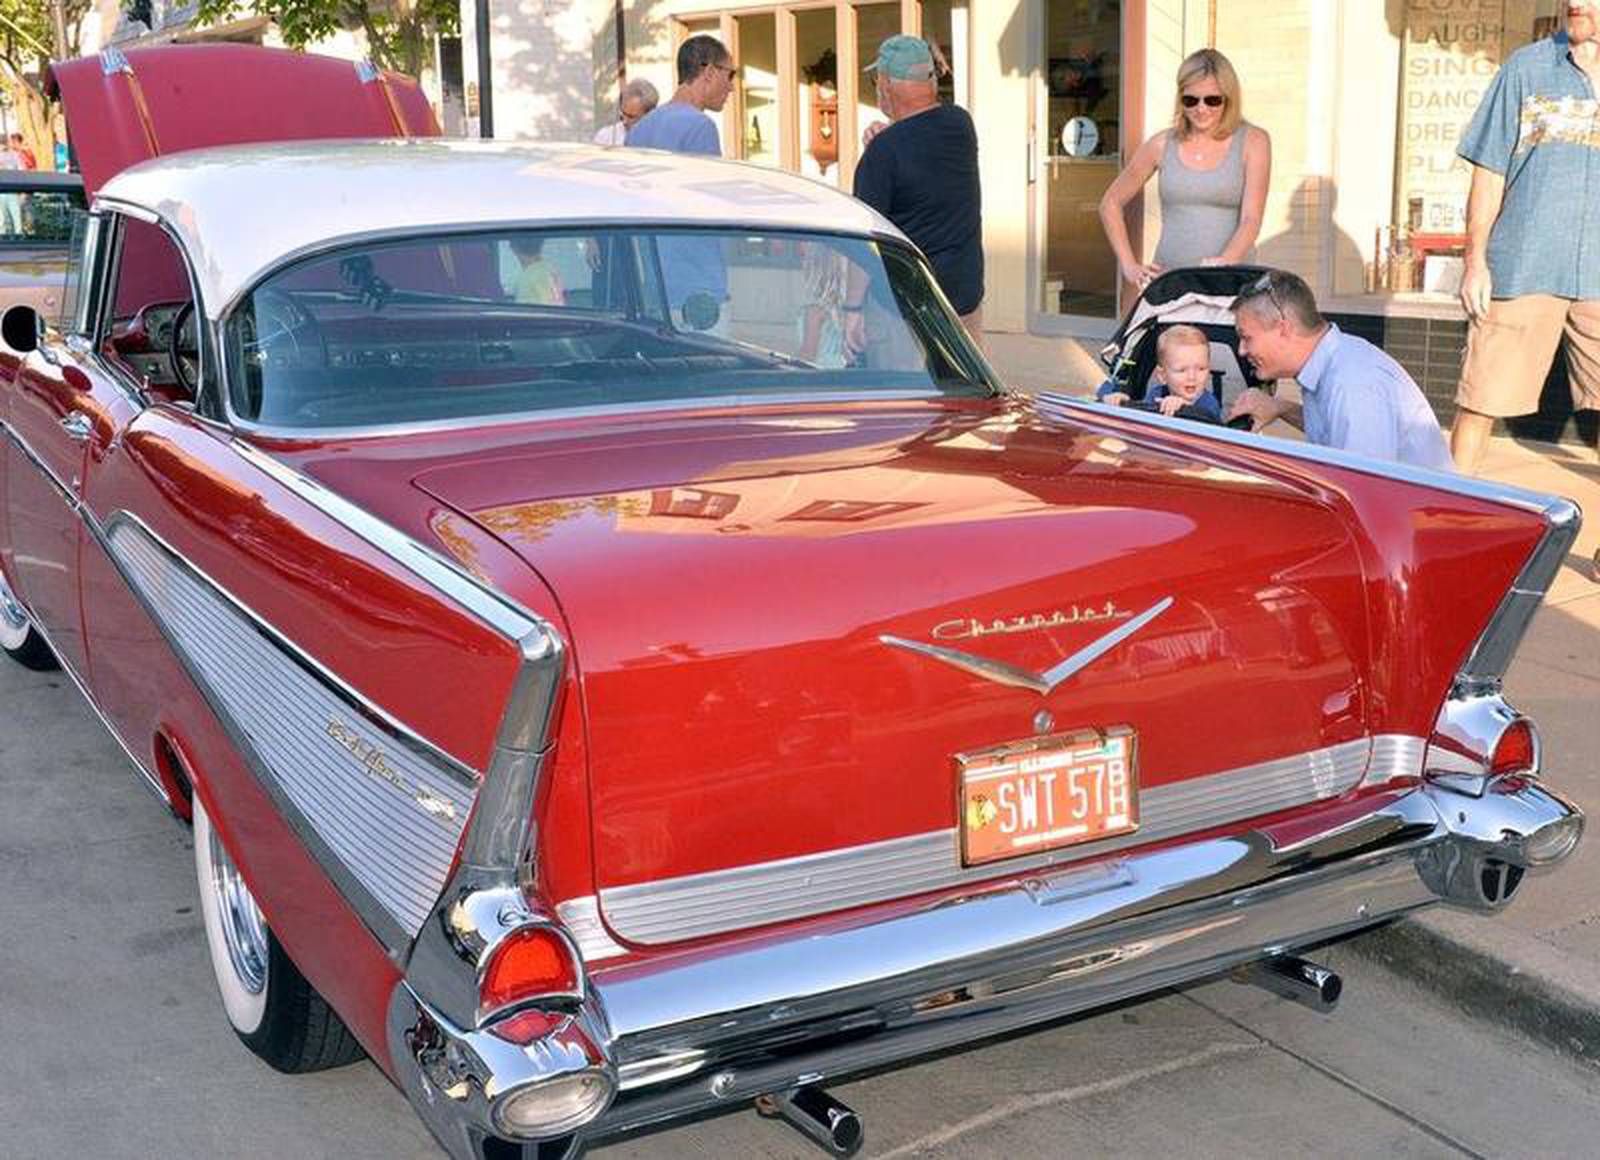 Classic Comeback. Downers Grove car show to resume after twoyear